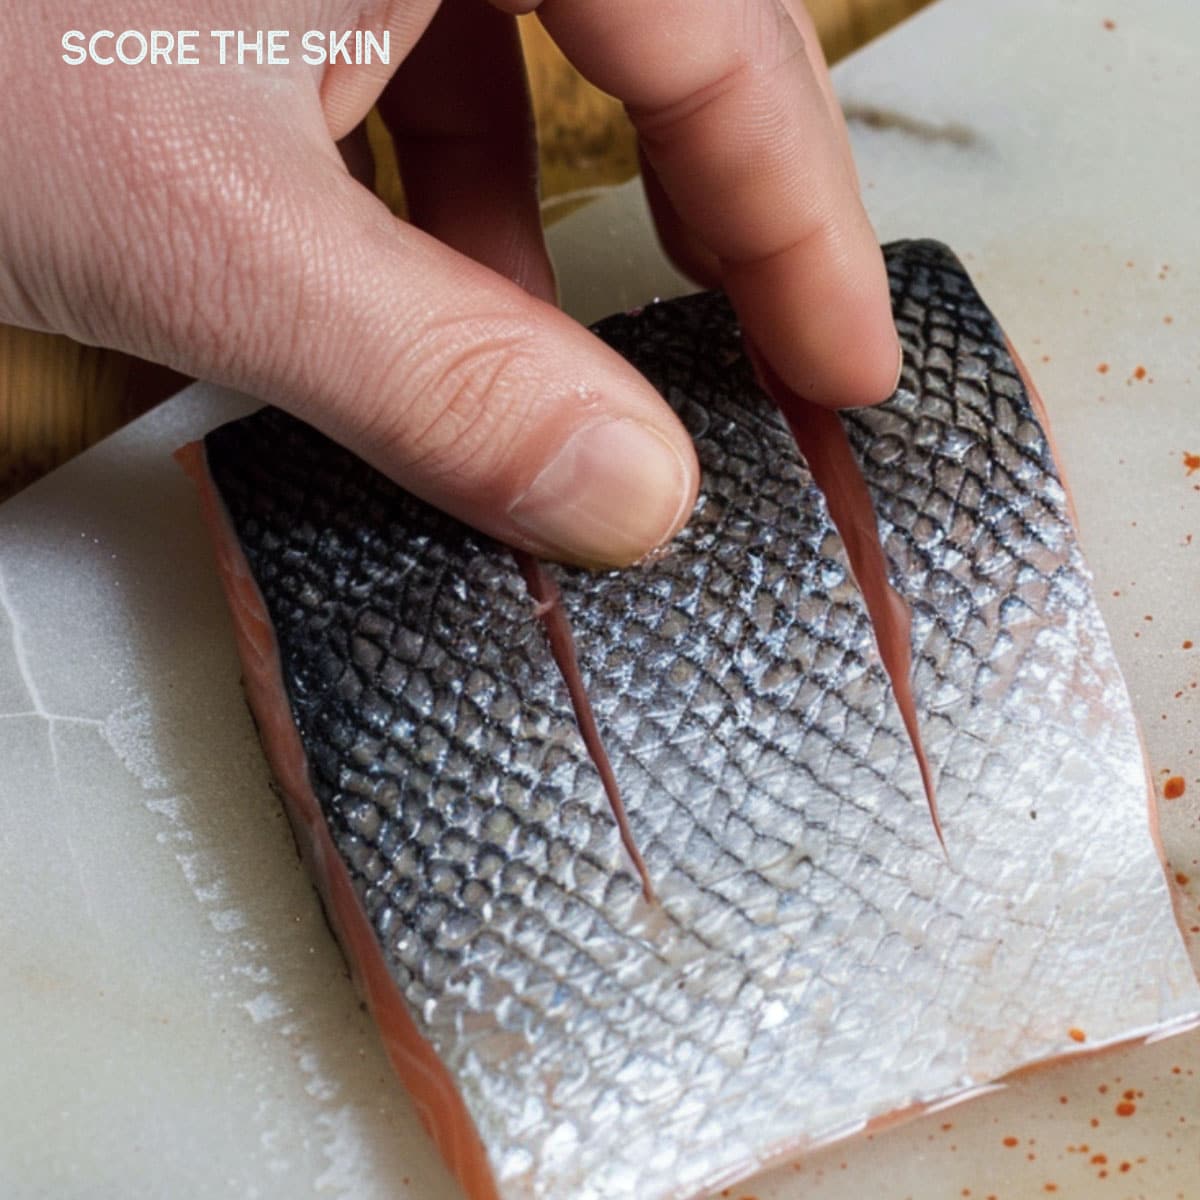 A person carefully scores the skin of a salmon fillet, making shallow crosshatch cuts for crispy skin